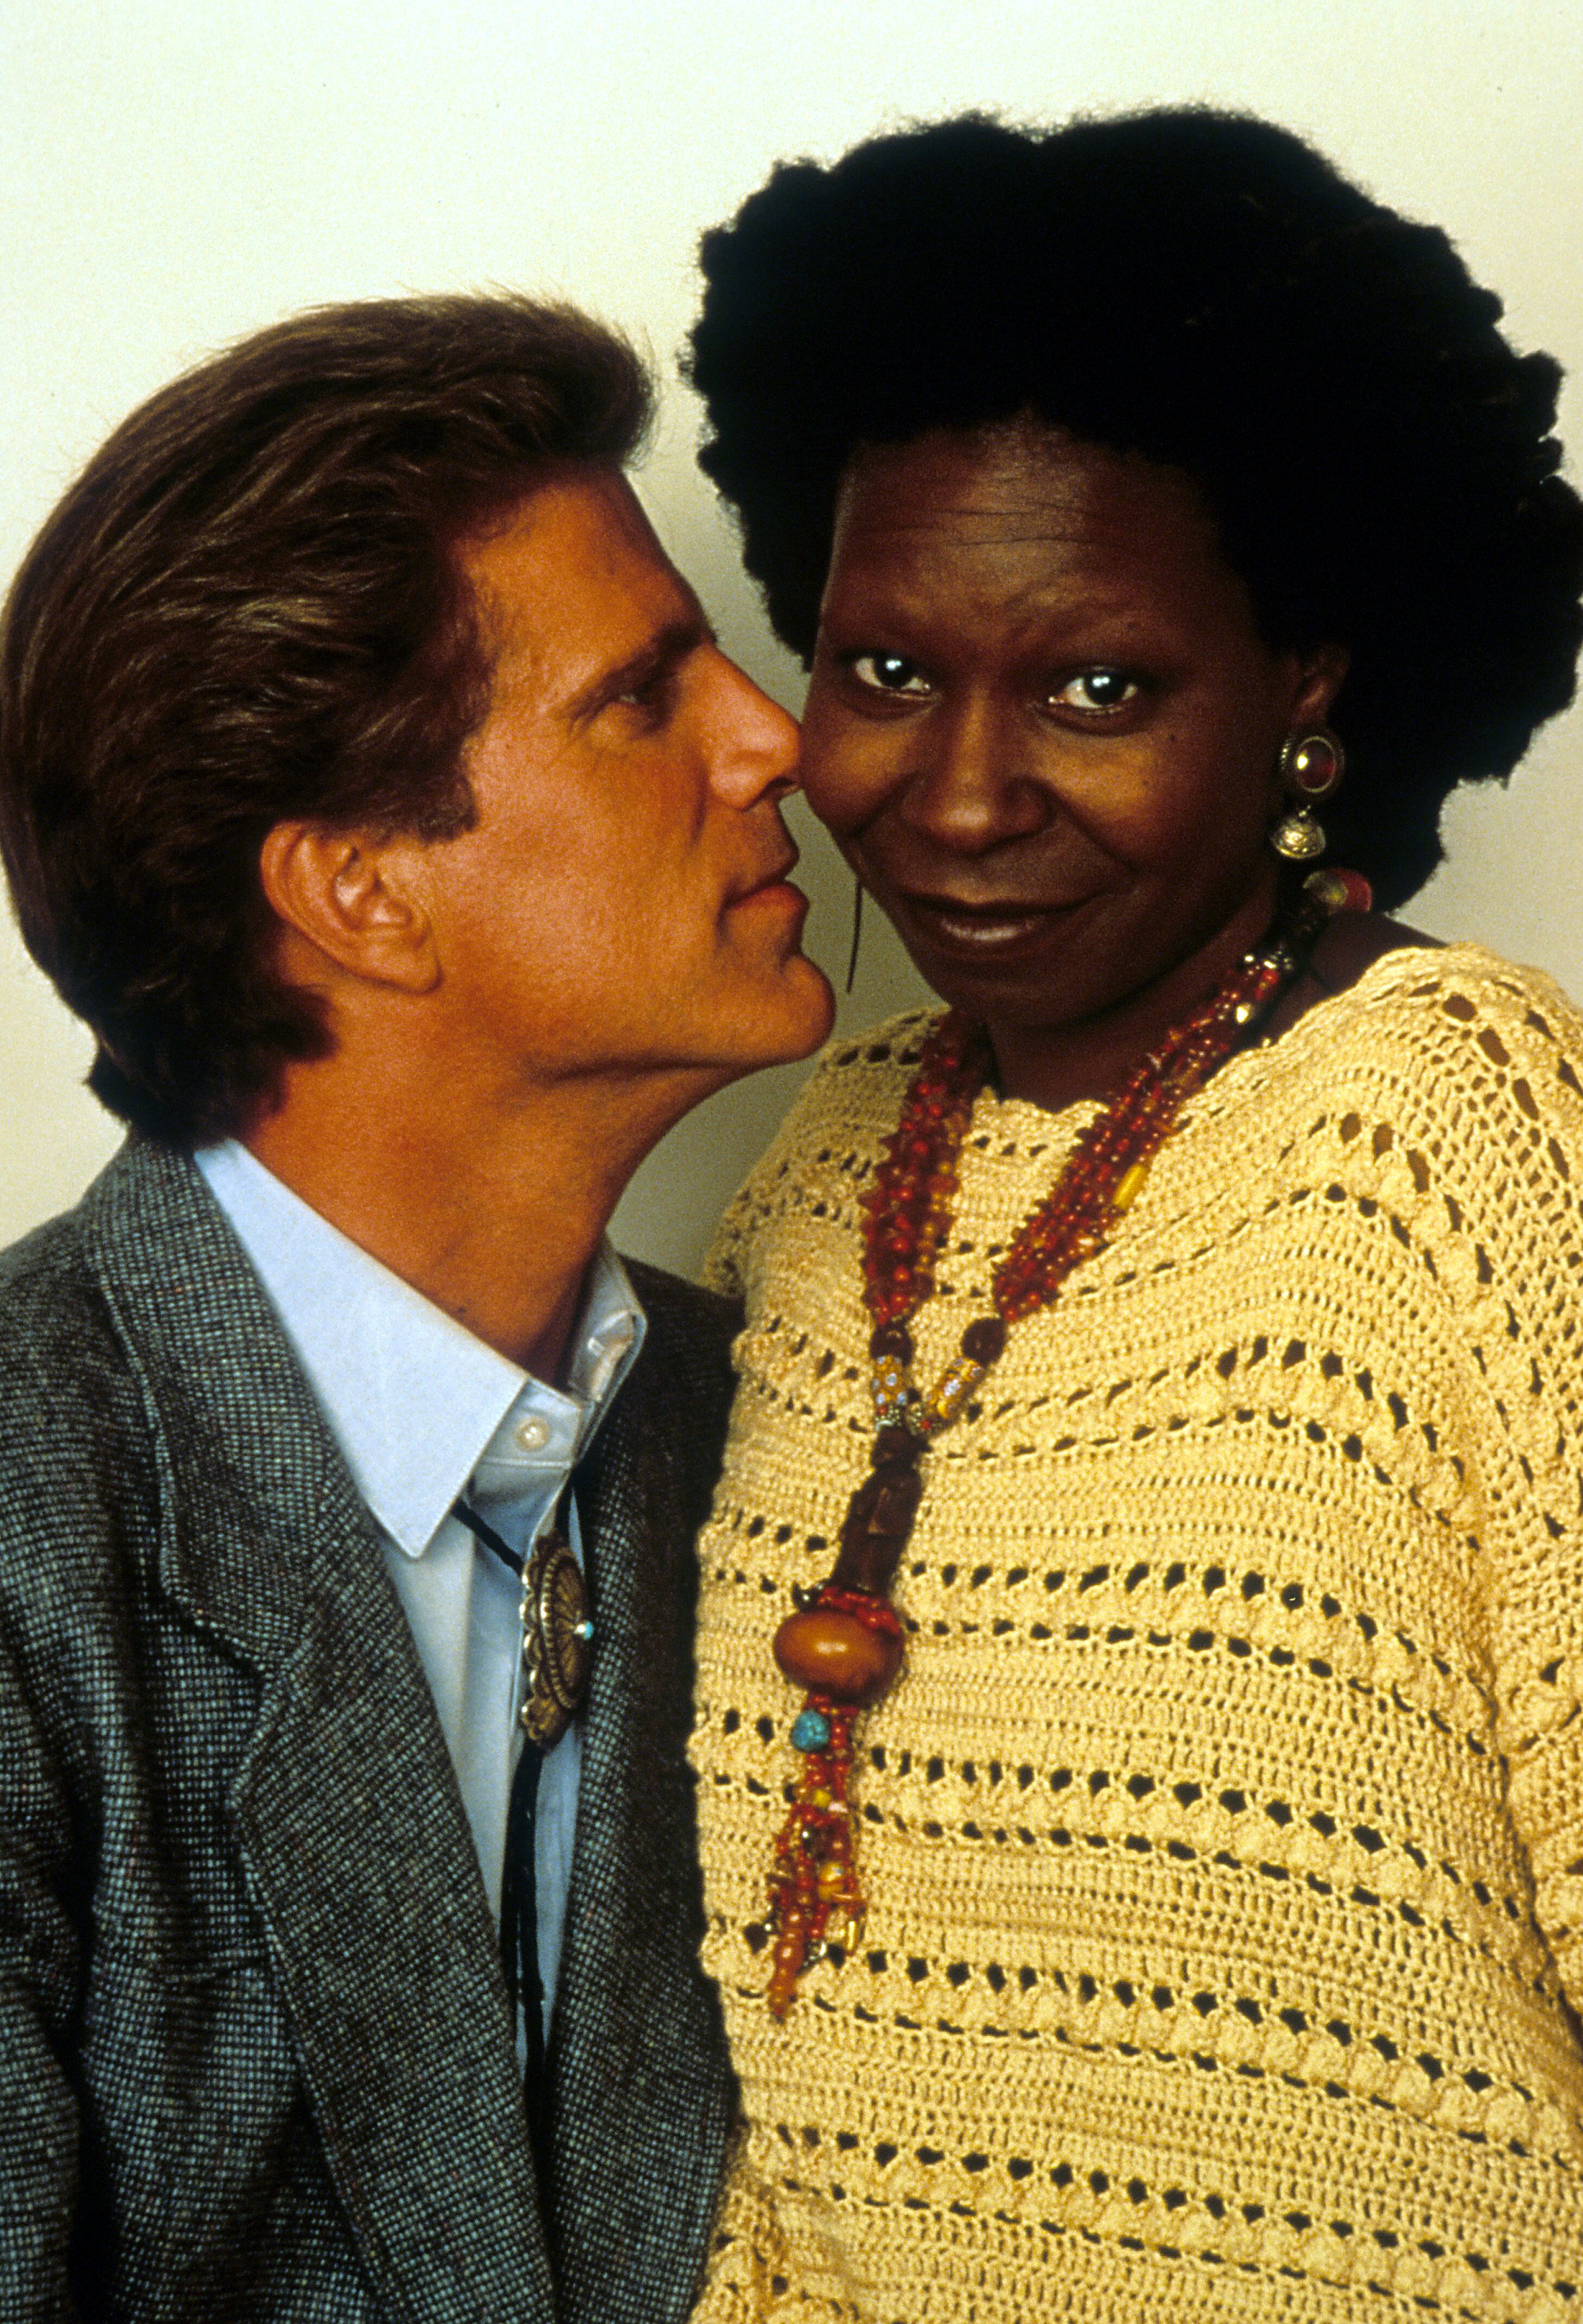 Whoopi Goldberg not amused by Ted Danson's face right up next to her in a scene from the film 'Made In America', 1993. | Photo: Getty Images